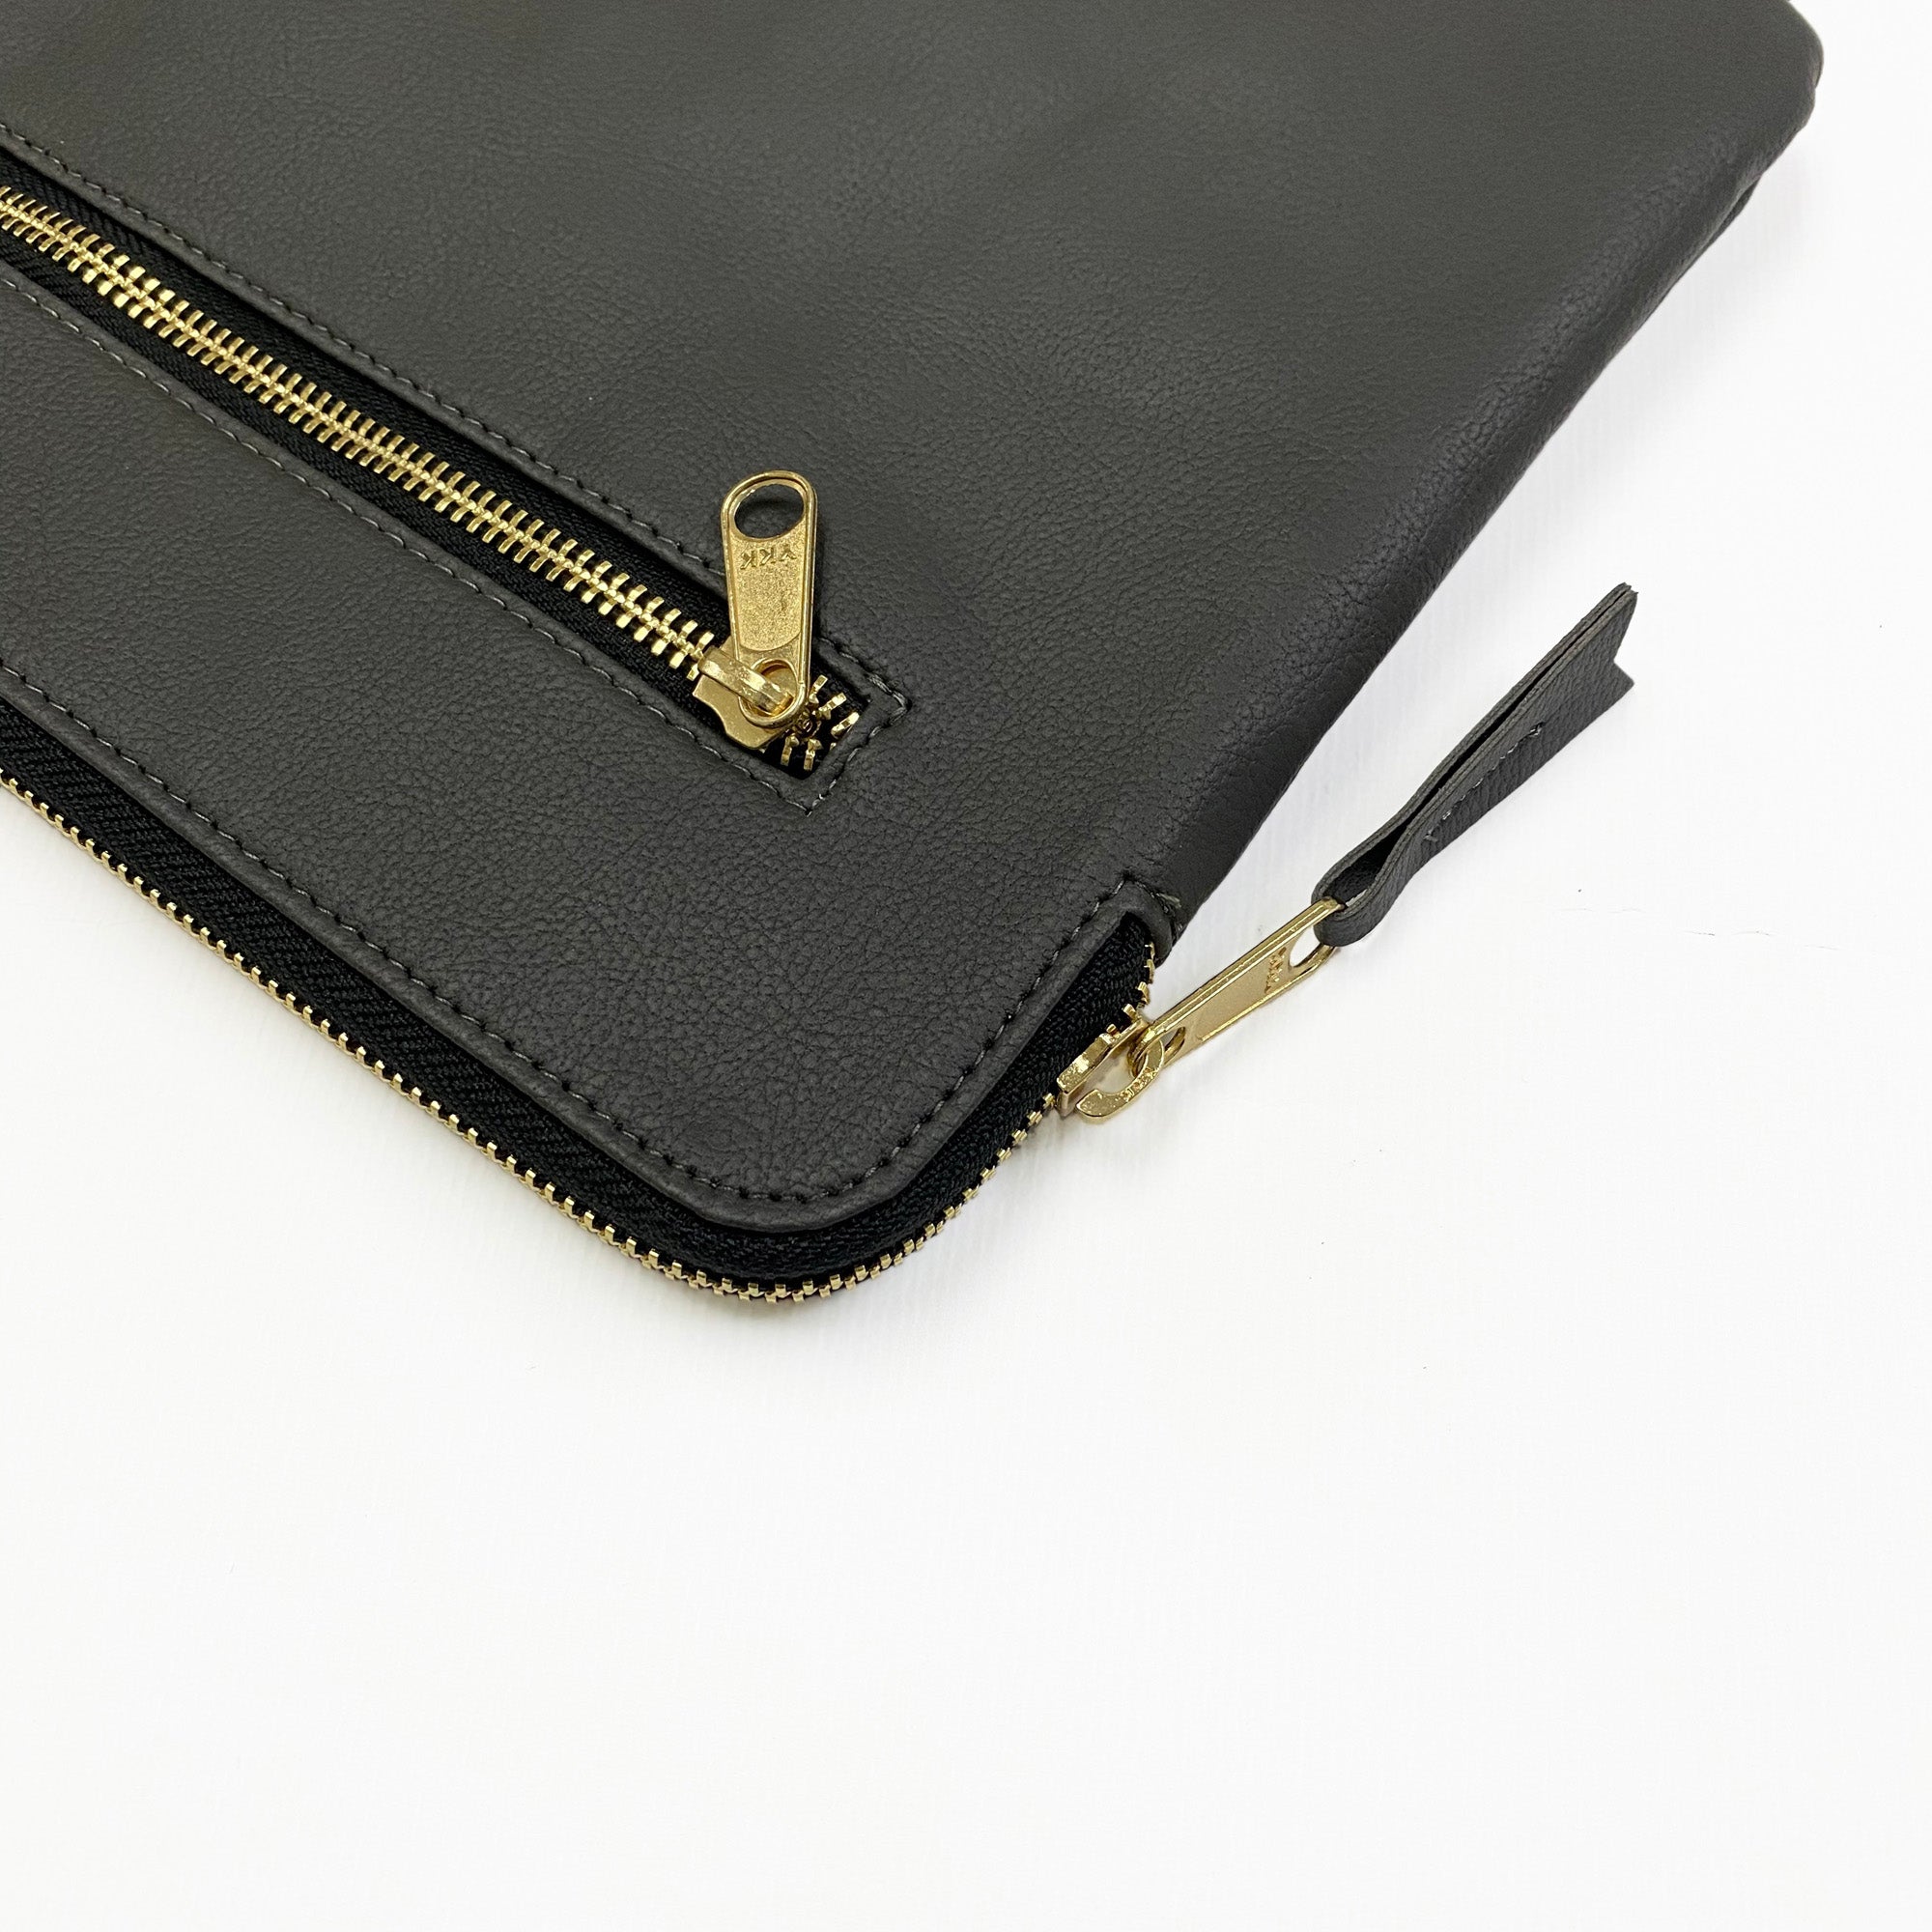 Black Tablet sleeve with zipper closure 